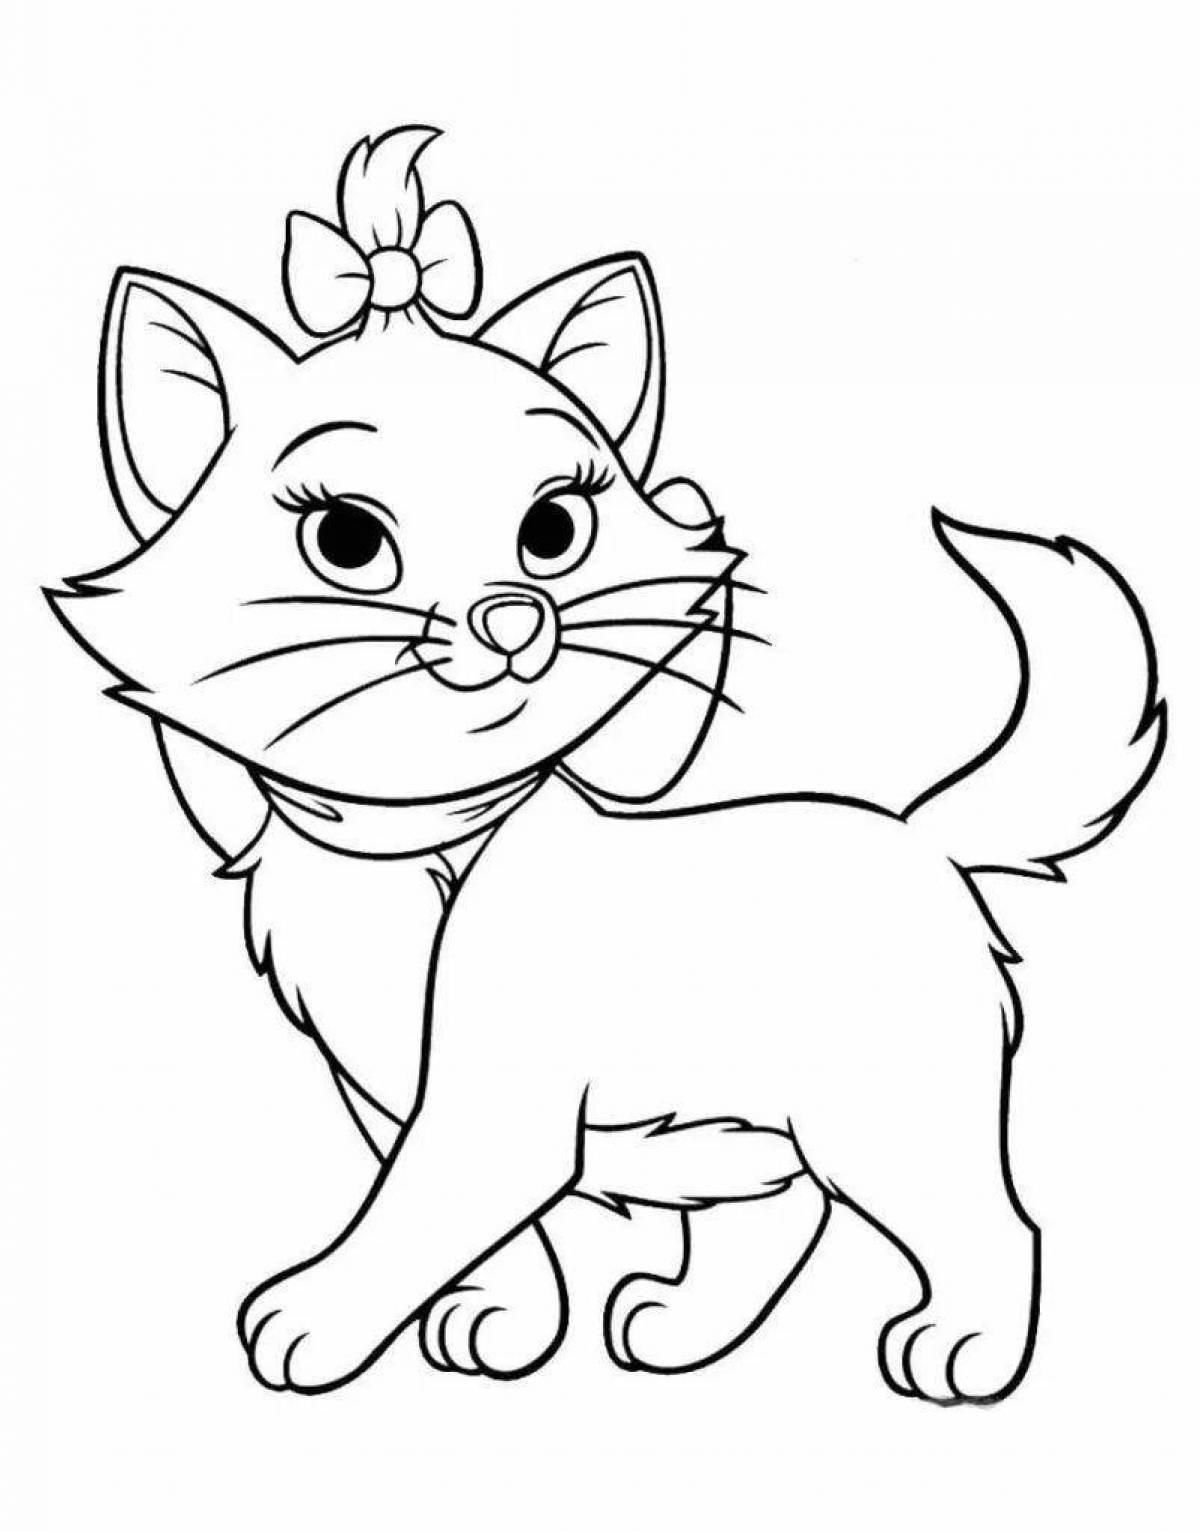 Adorable cat year coloring page